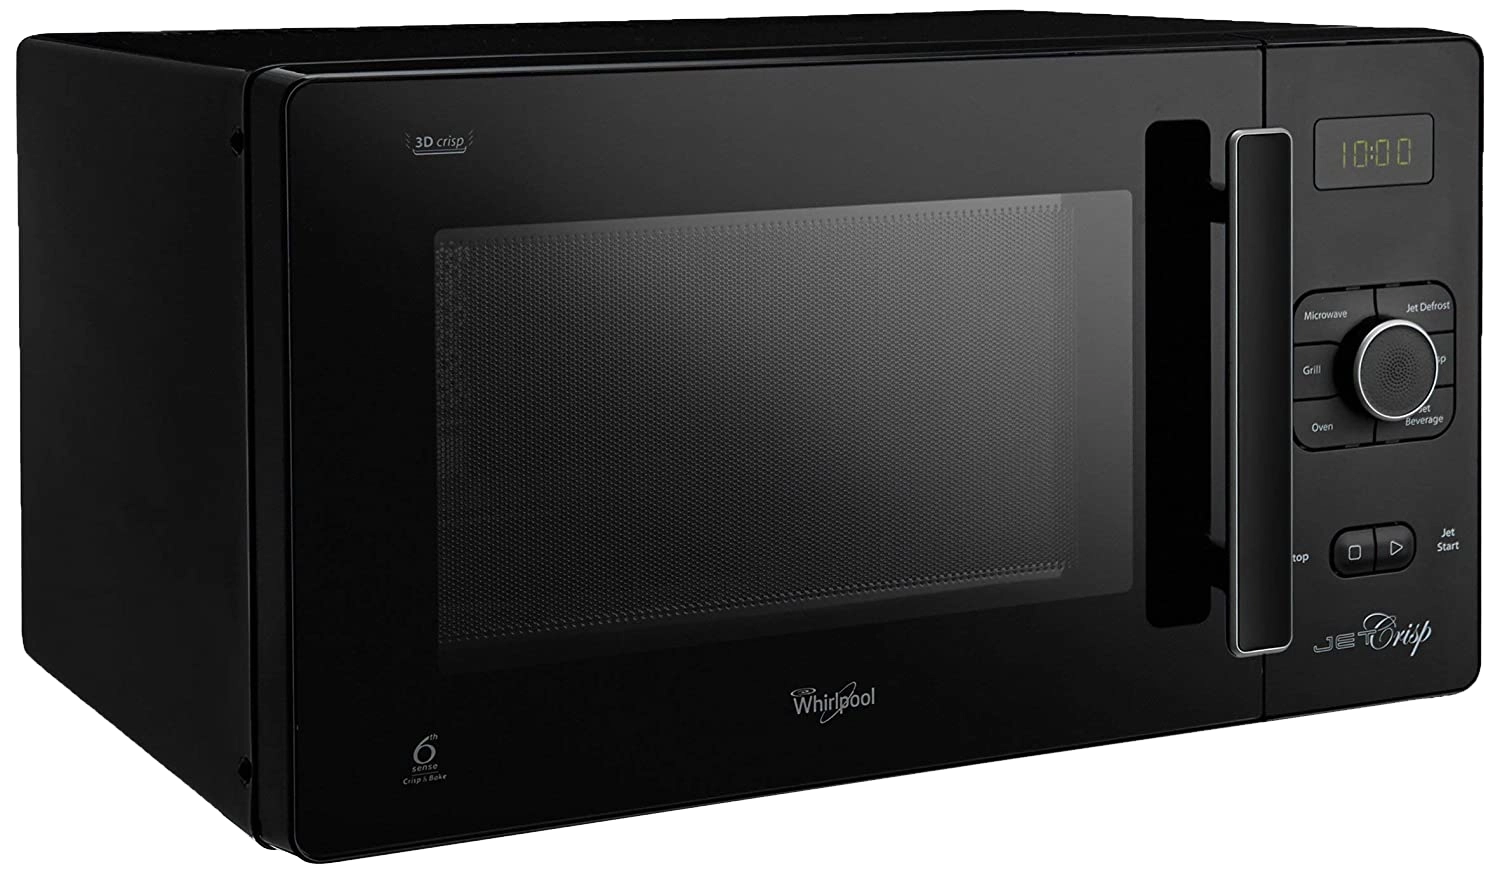 Whirlpool 25 L Crisp Convection Microwave Oven GT288 thumbnail